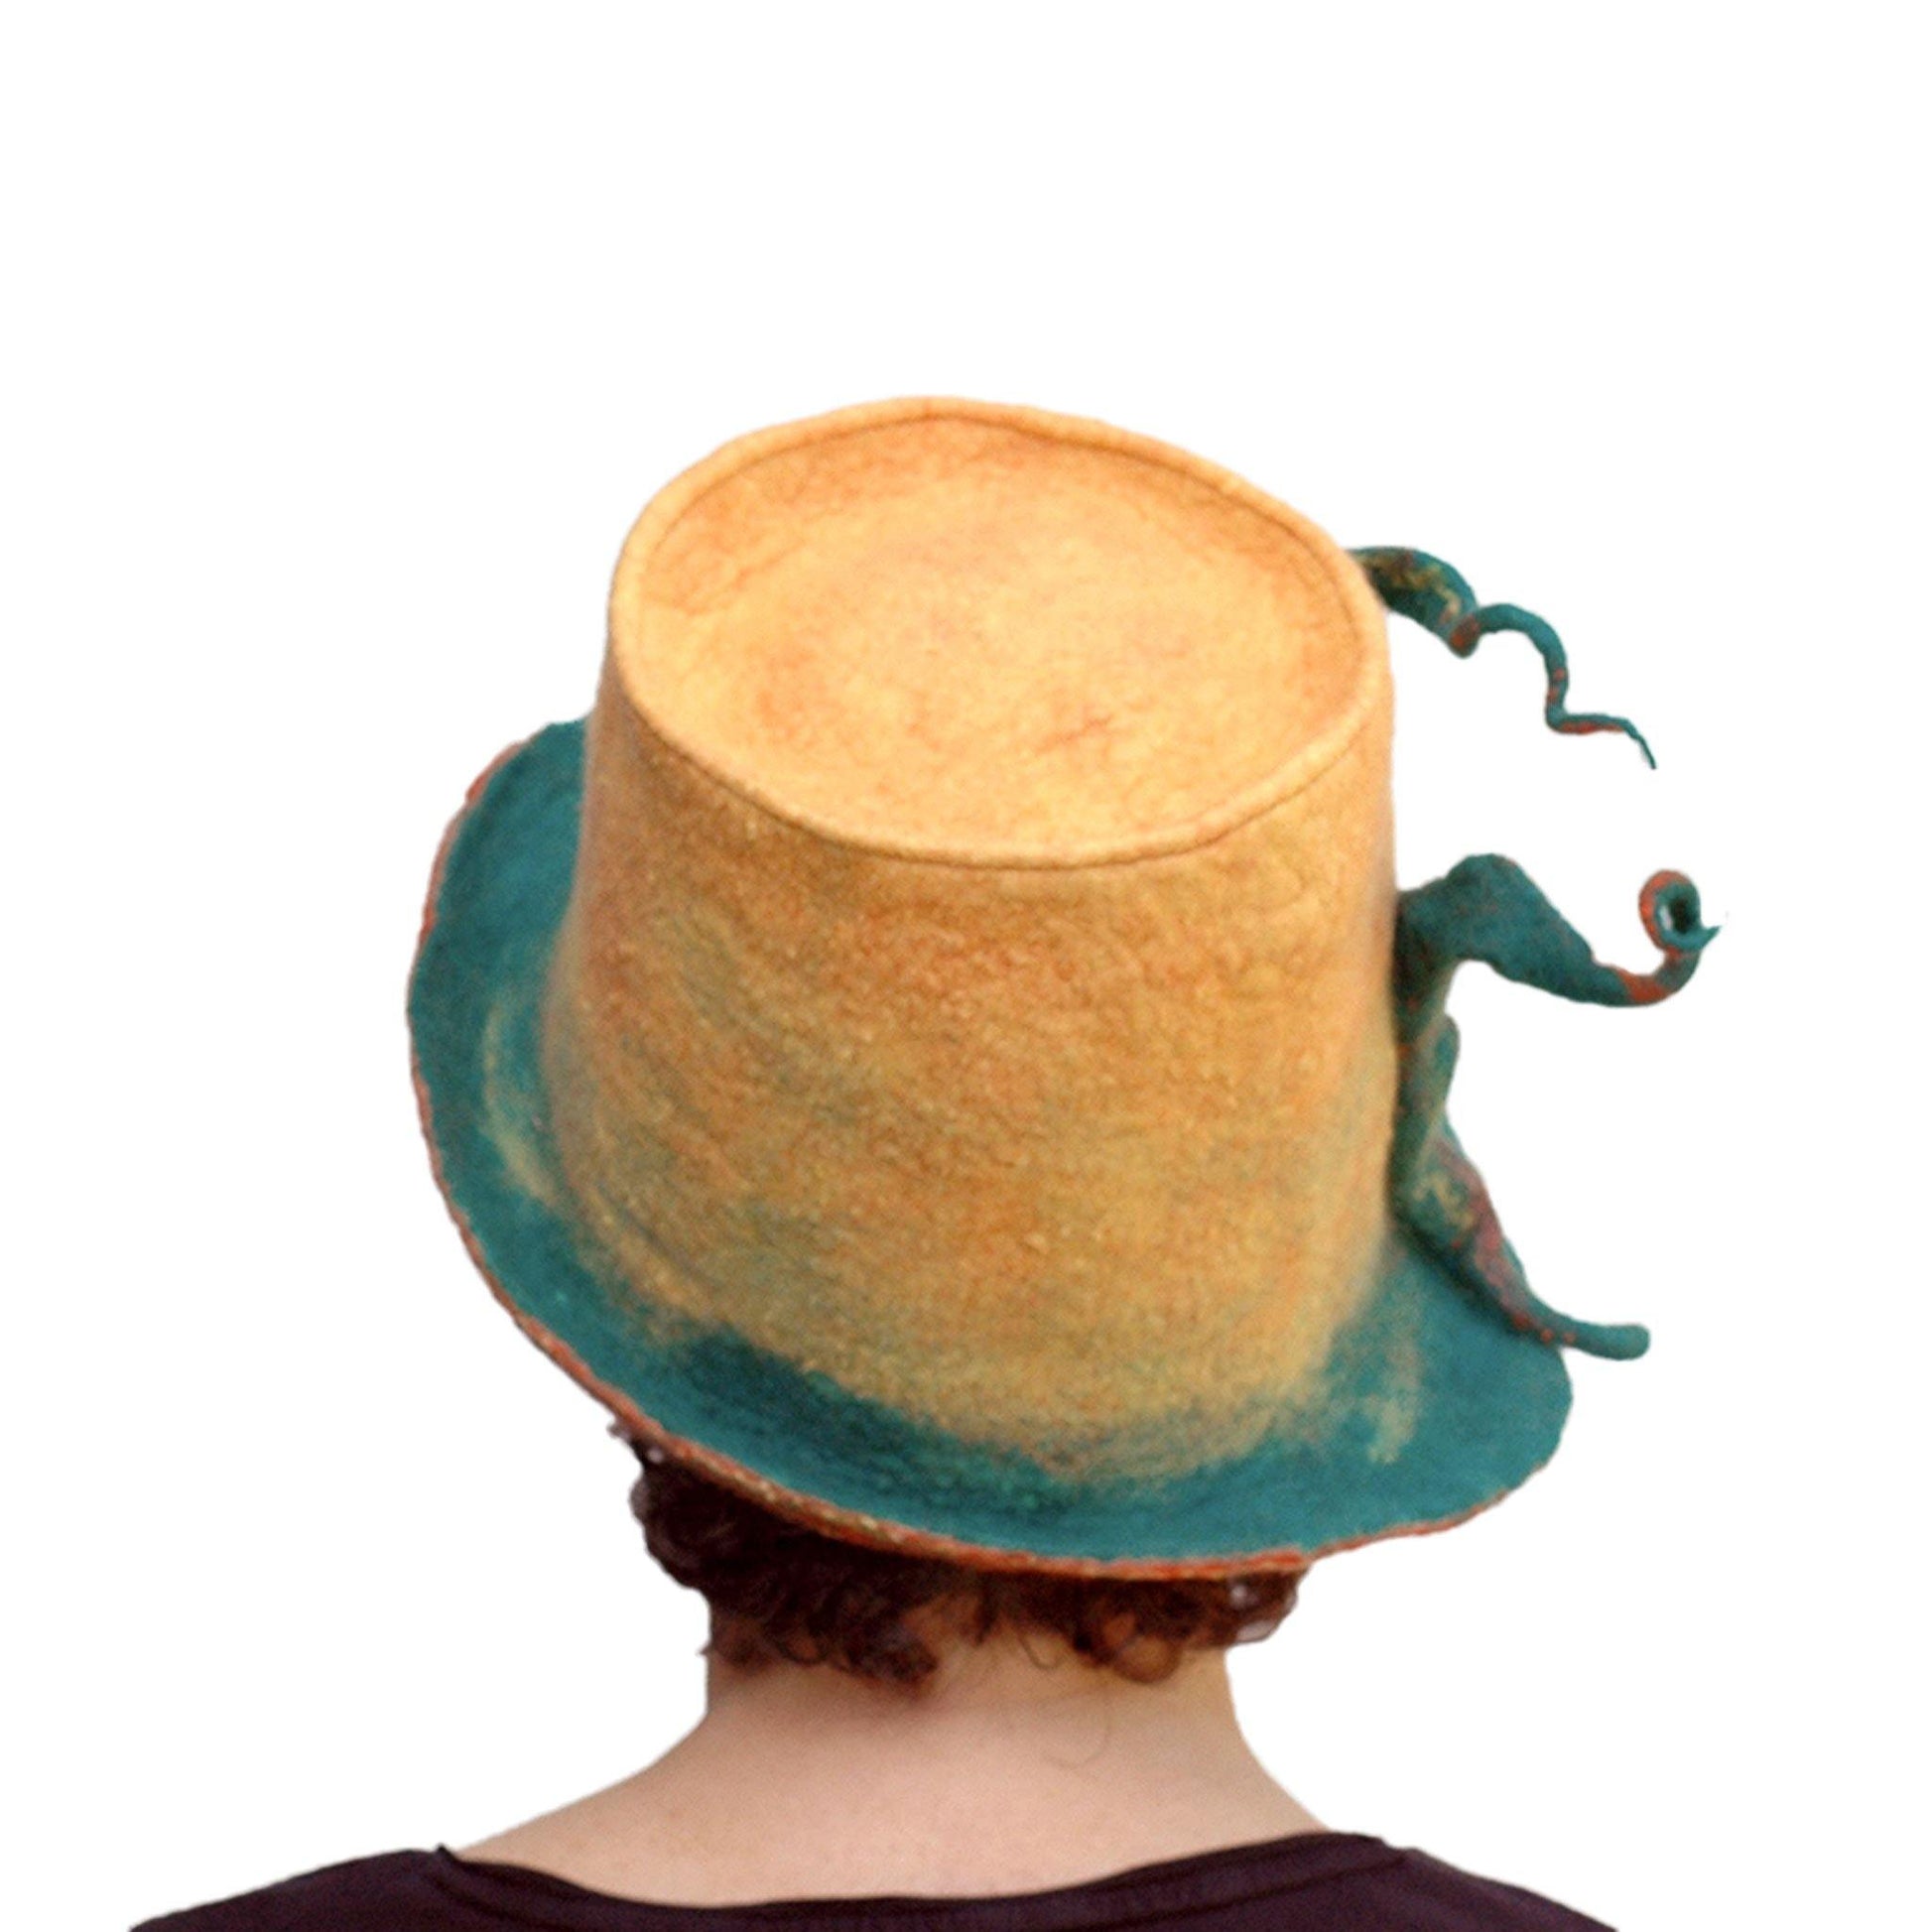 Almost Classic Yellow Fedora with Organic Shaped Pods - back view